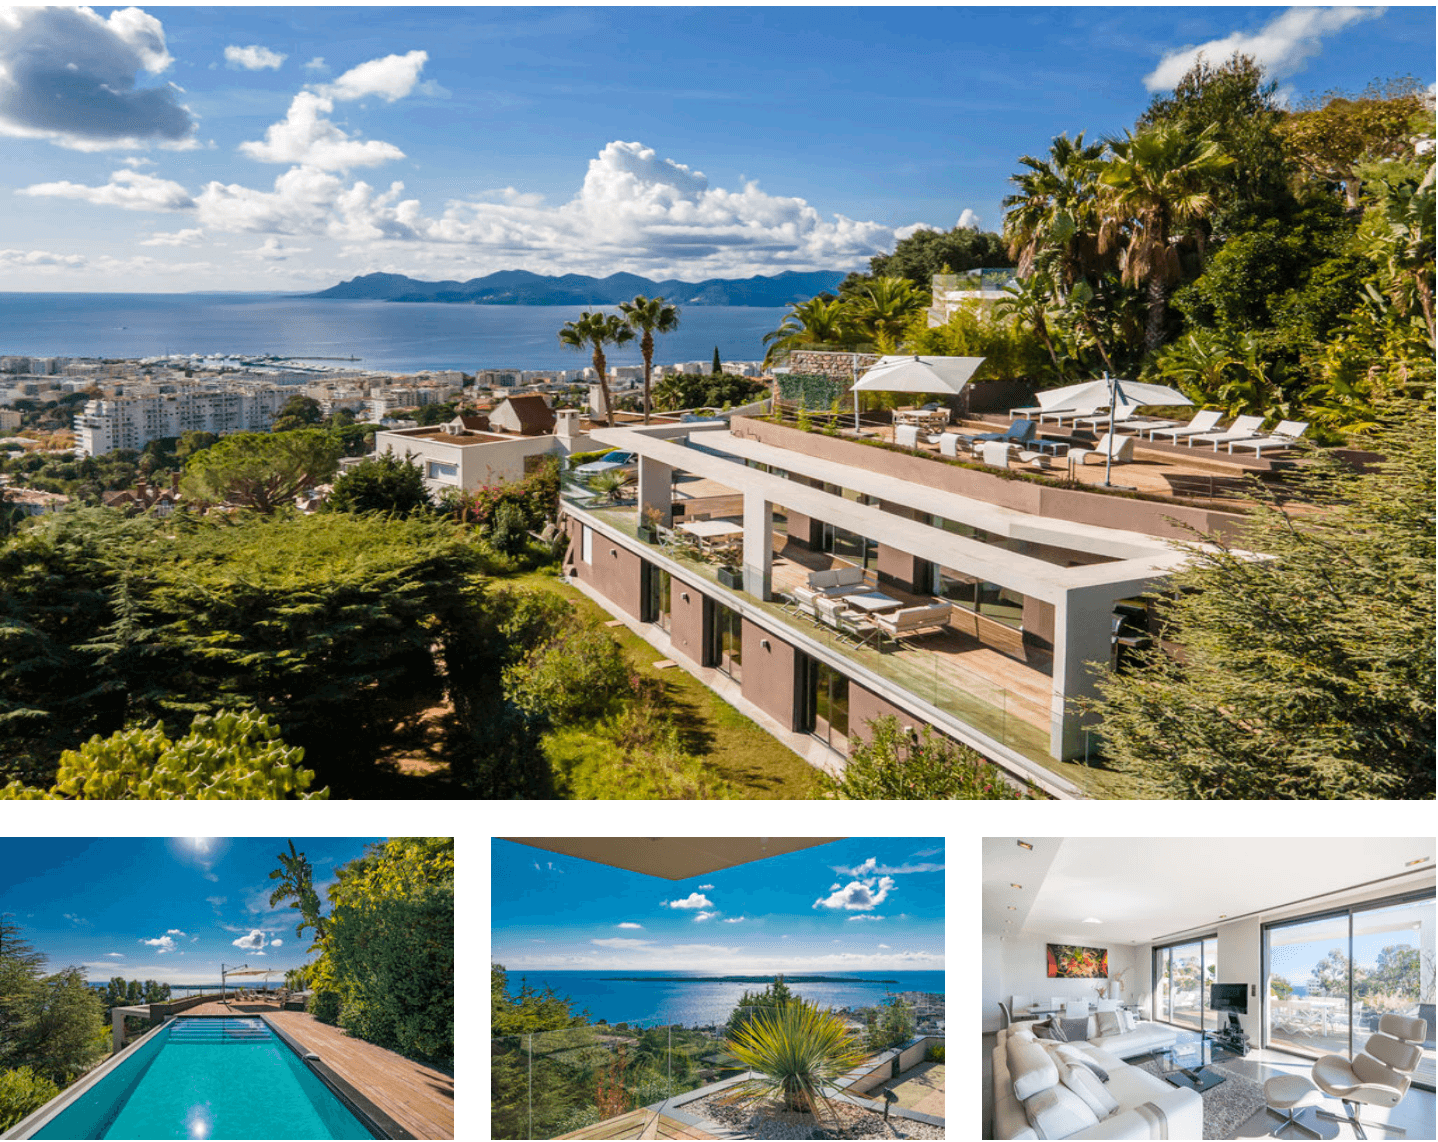 Cannes Californie, Renovated contemporary villa with panoramic sea view.